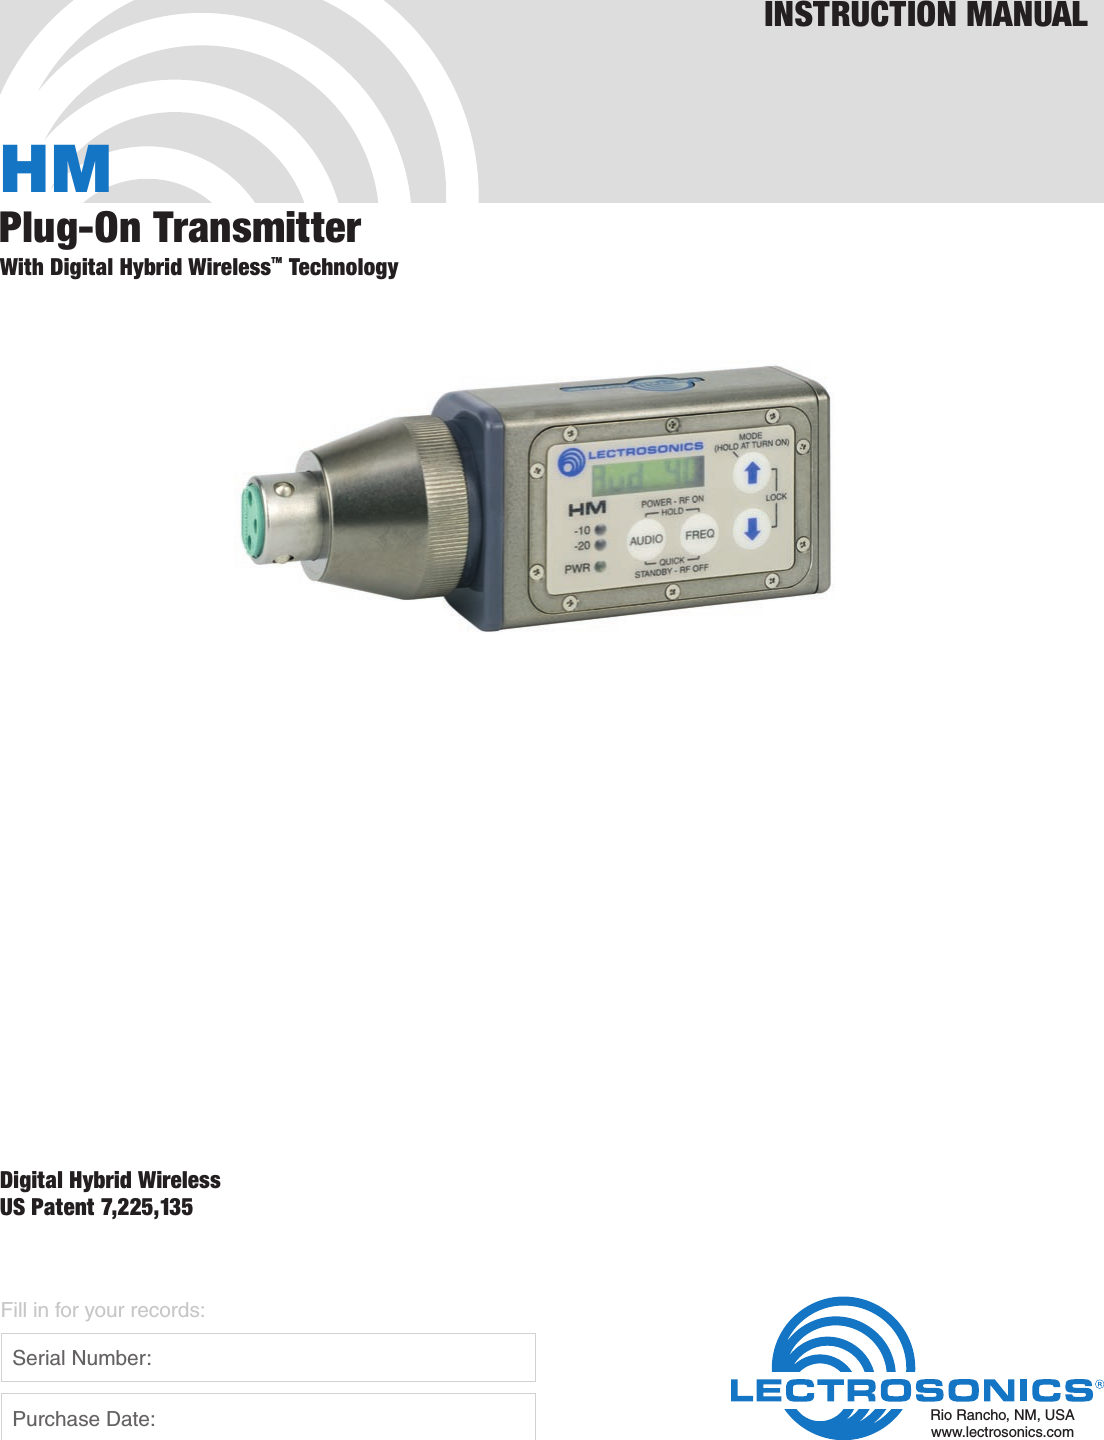 HMPlug-On TransmitterWith Digital Hybrid Wireless™ TechnologyINSTRUCTION MANUALRio Rancho, NM, USAwww.lectrosonics.comFill in for your records:  Serial Number:  Purchase Date:Digital Hybrid WirelessUS Patent 7,225,135